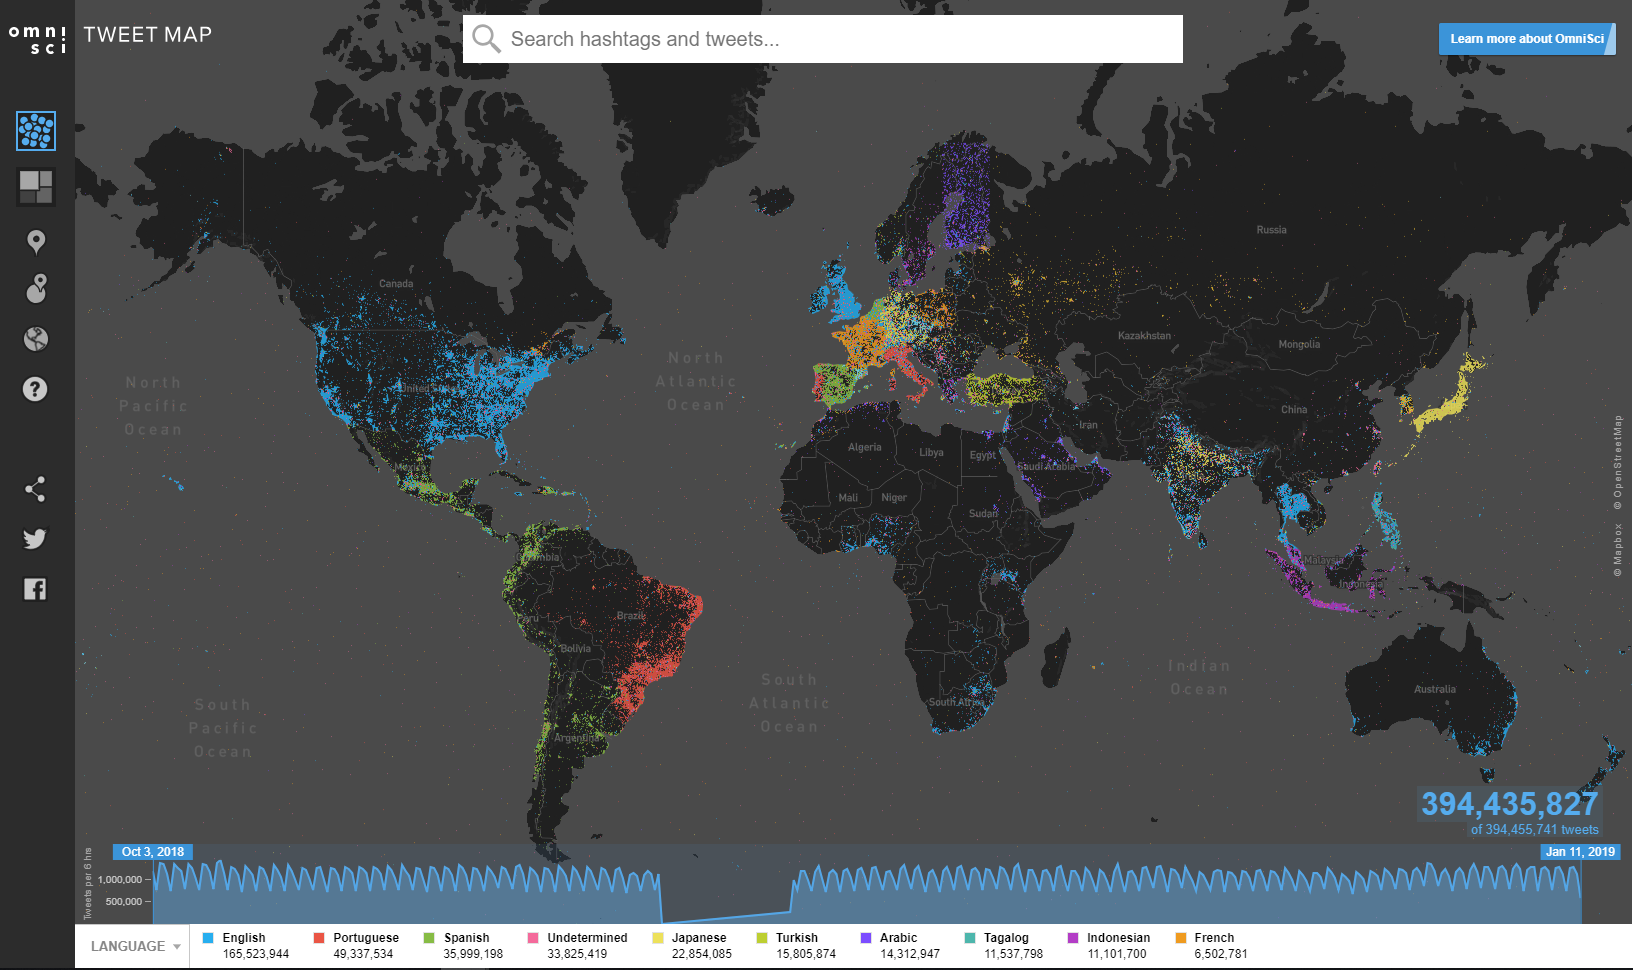 A map depicting the volume of Twitter users across the world